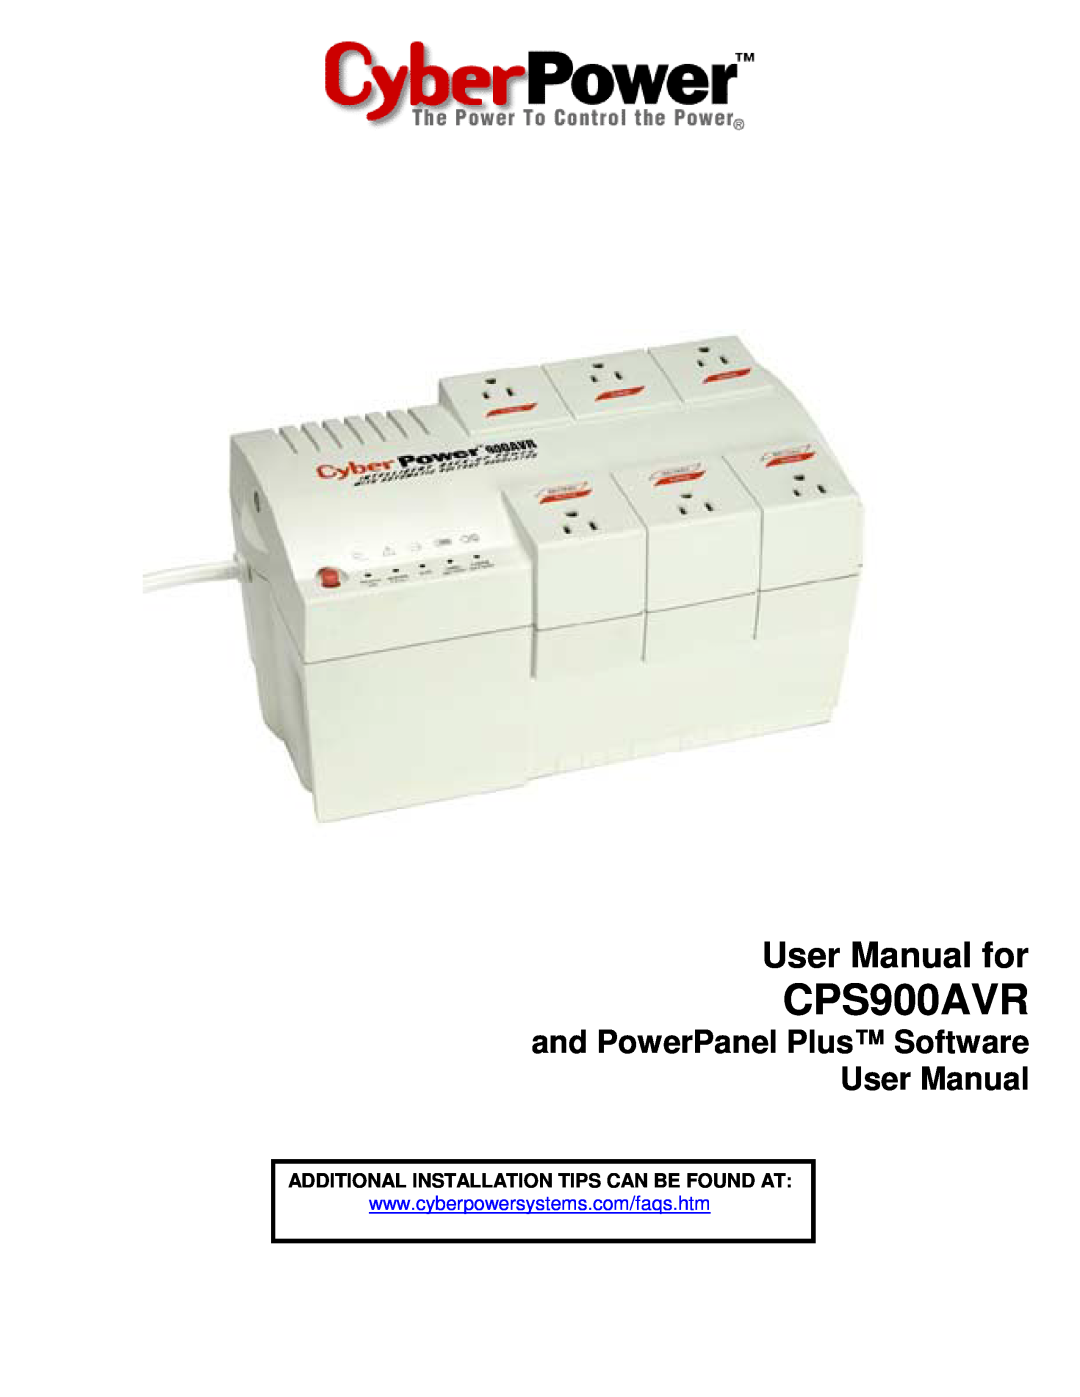 CyberPower Systems CPS900AVR user manual Additional Installation Tips Can Be Found At, User Manual for 